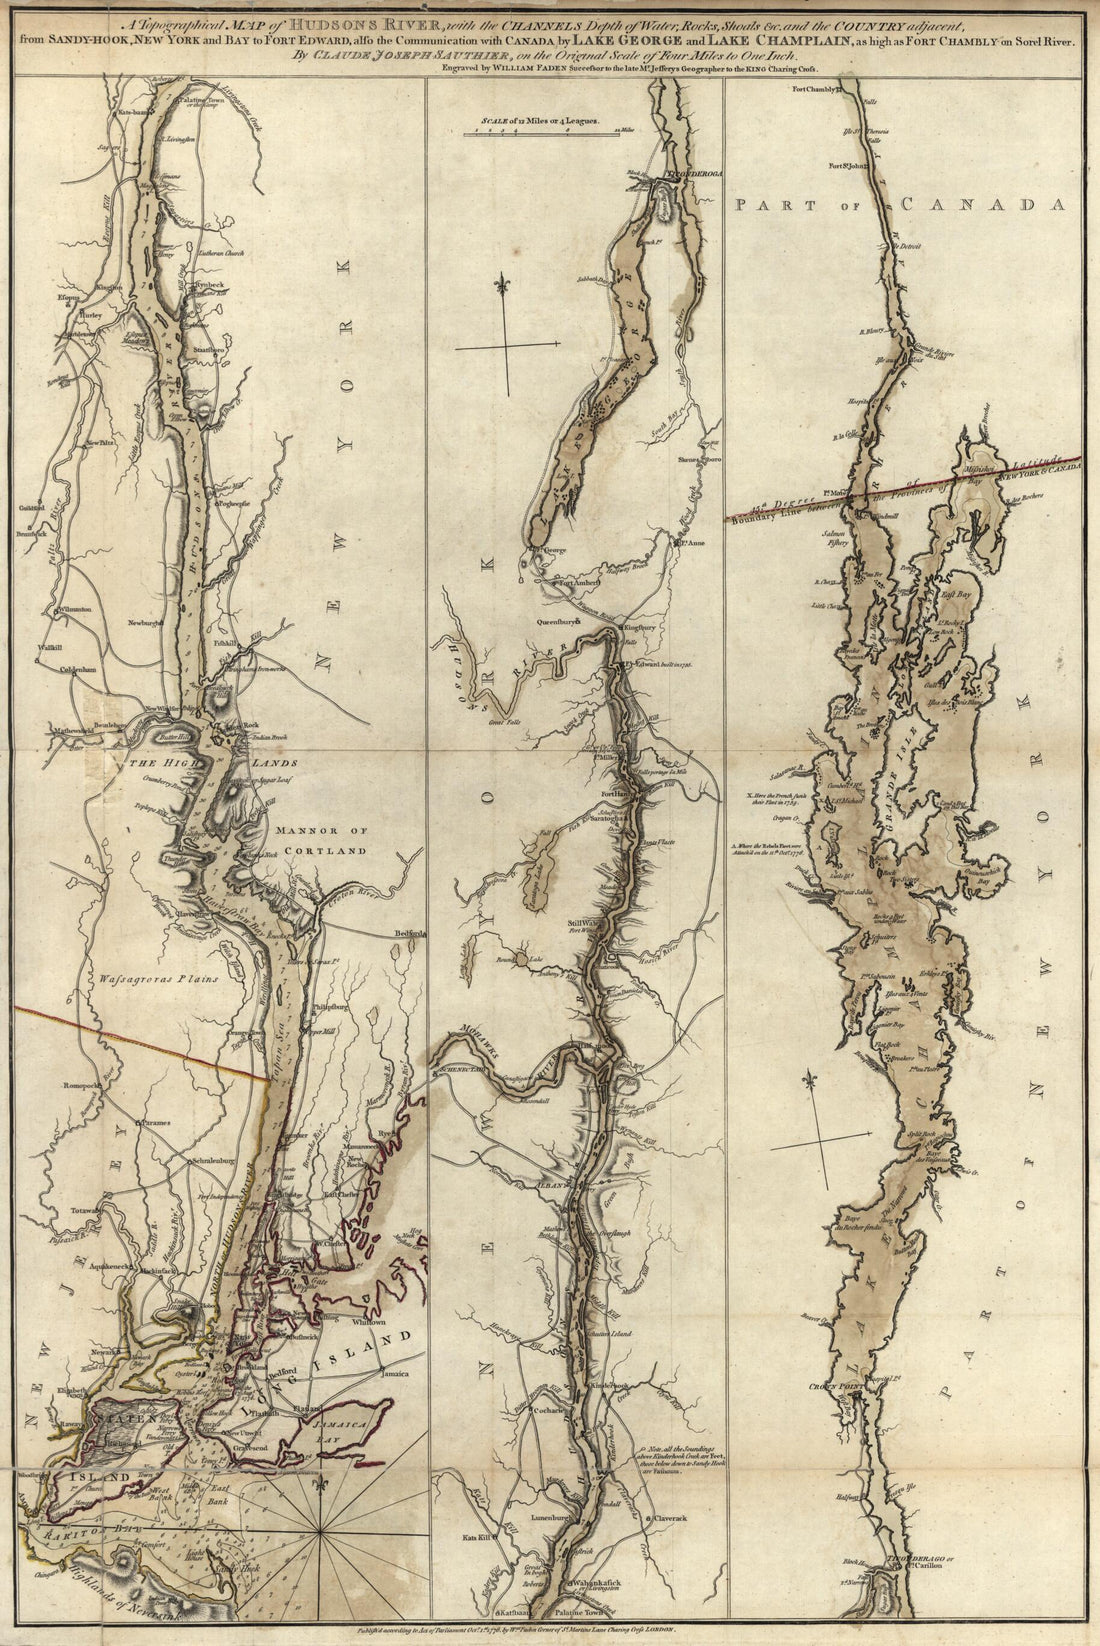 This old map of A Topographical Map of Hudsons RiverLake George and Lake Champlain from the North American Atlas, Selected from the Most Authentic Maps, Charts, Plans, &amp;c. Hitherto Published. from 1777 was created by Thomas Jefferys in 1777